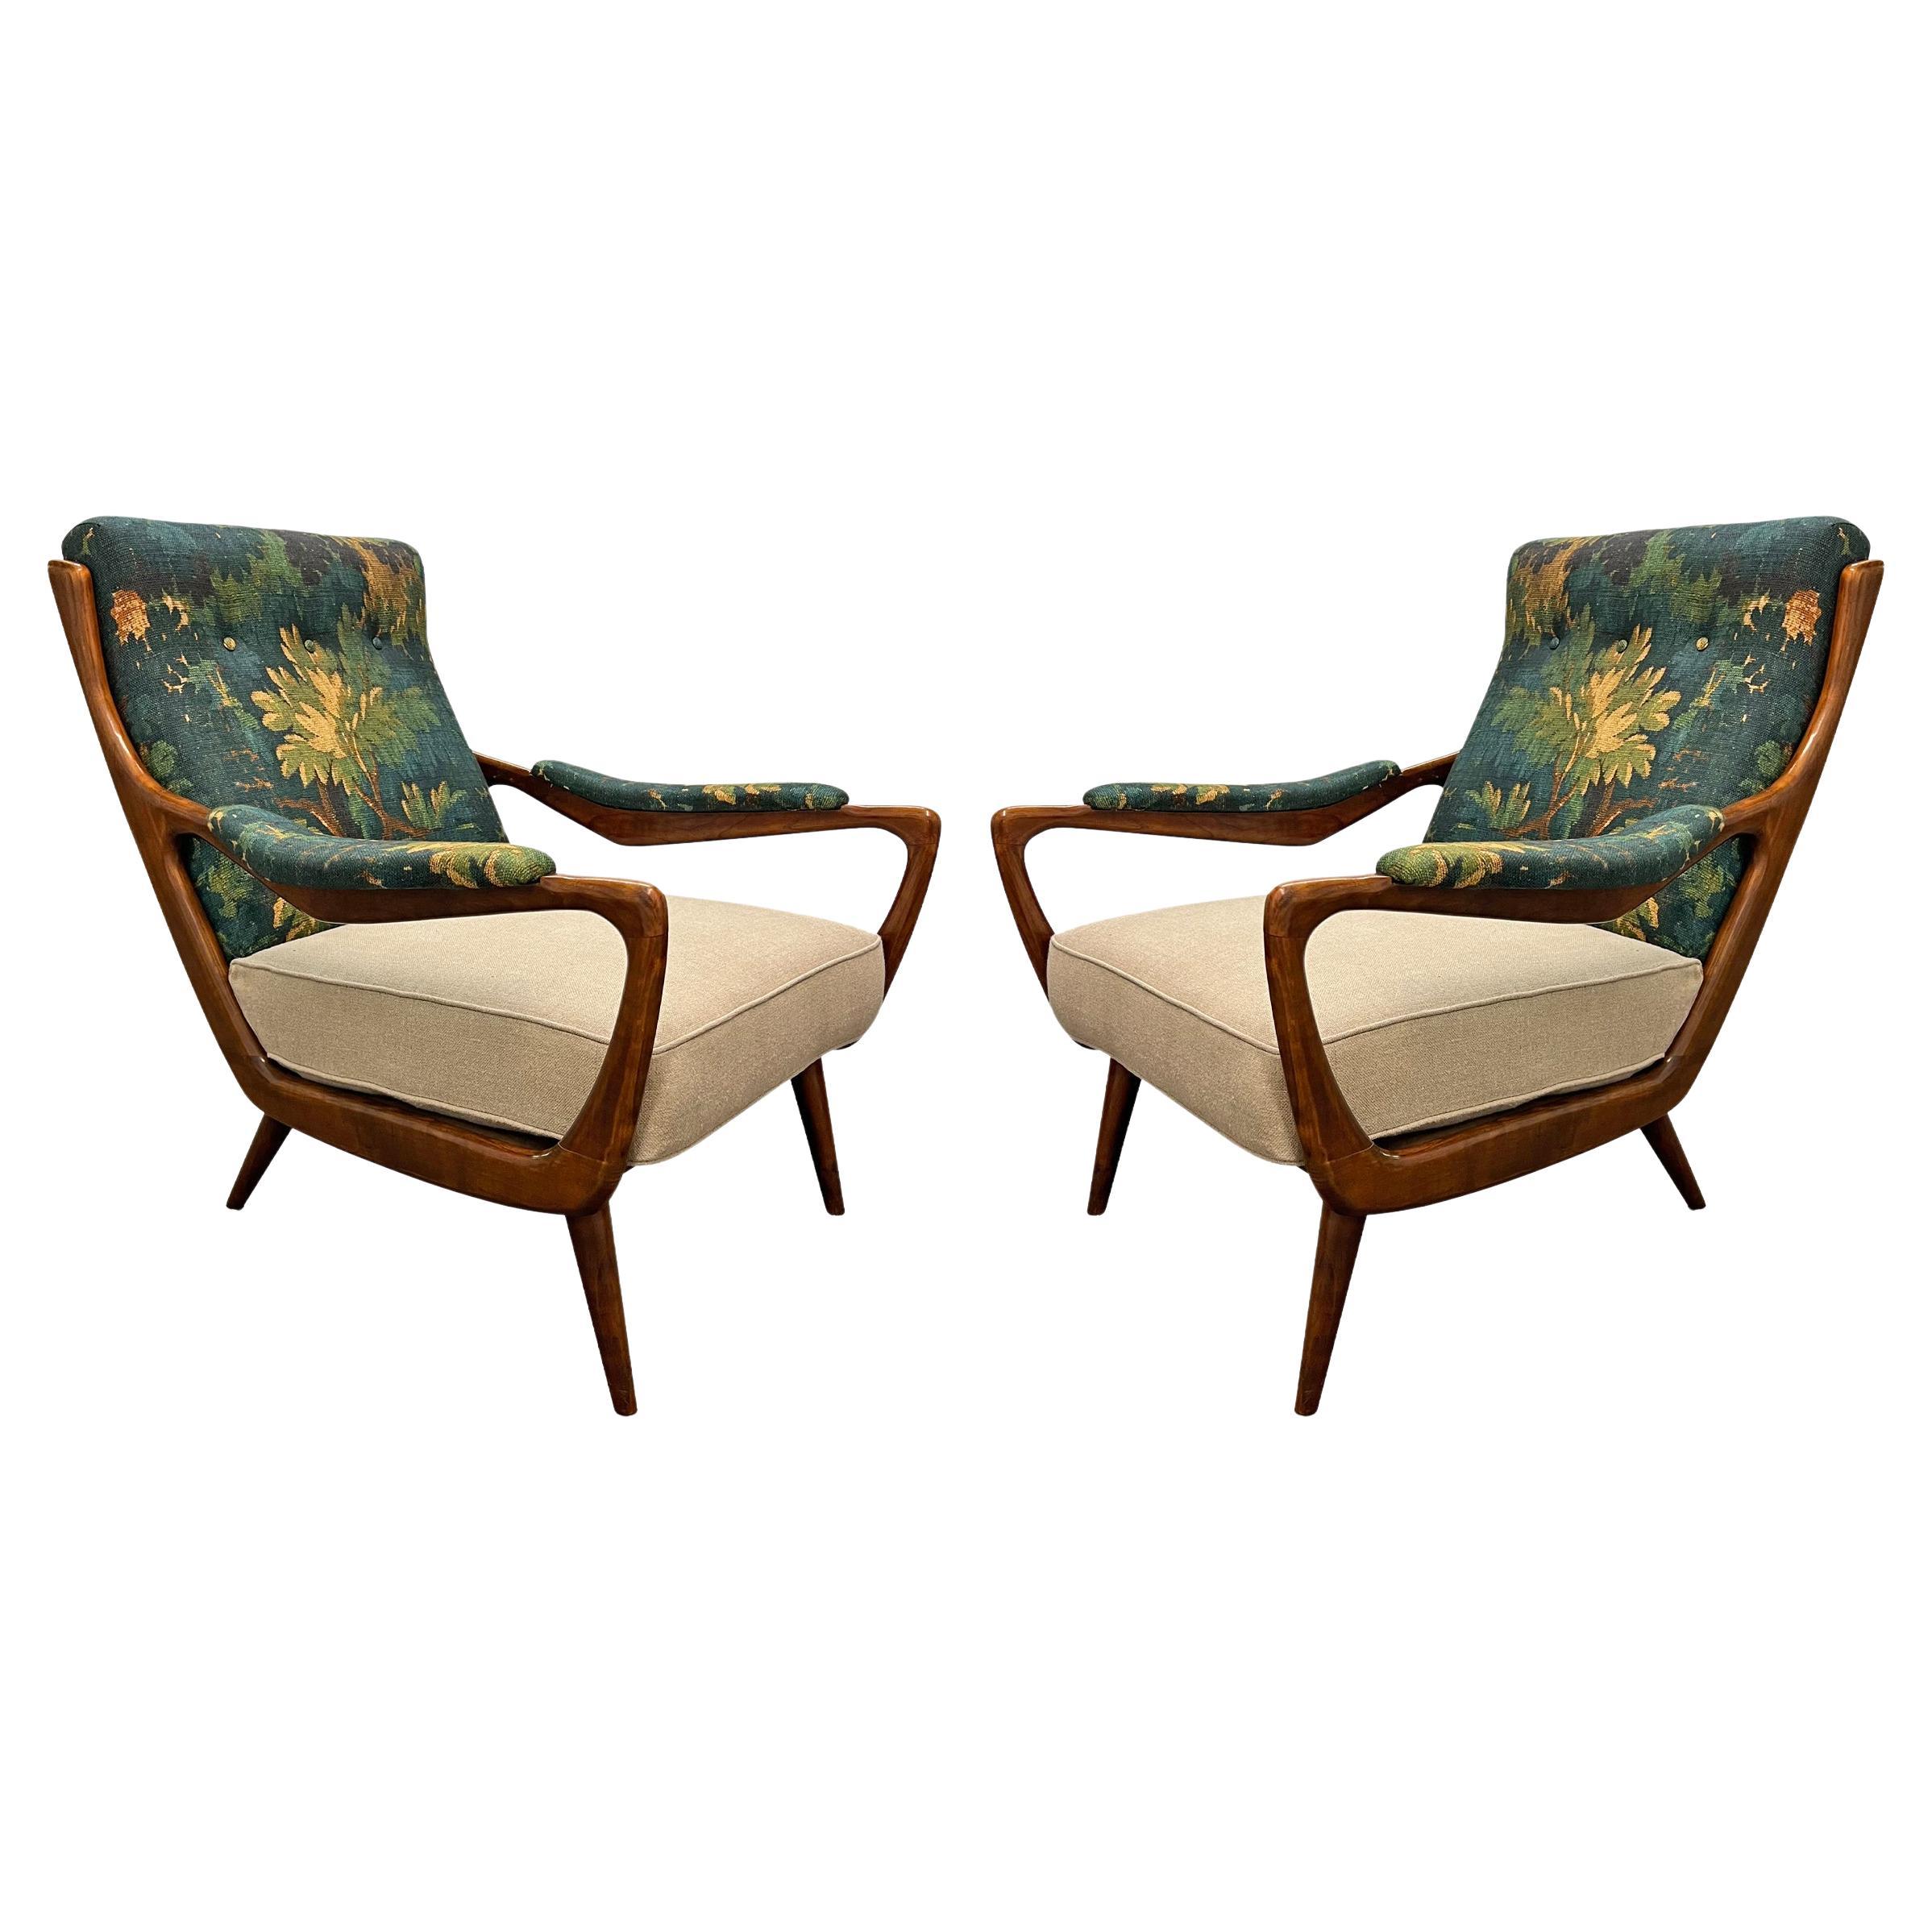 Set of Four 1950s Danish Modern Lounge Chairs In Good Condition For Sale In Chicago, IL